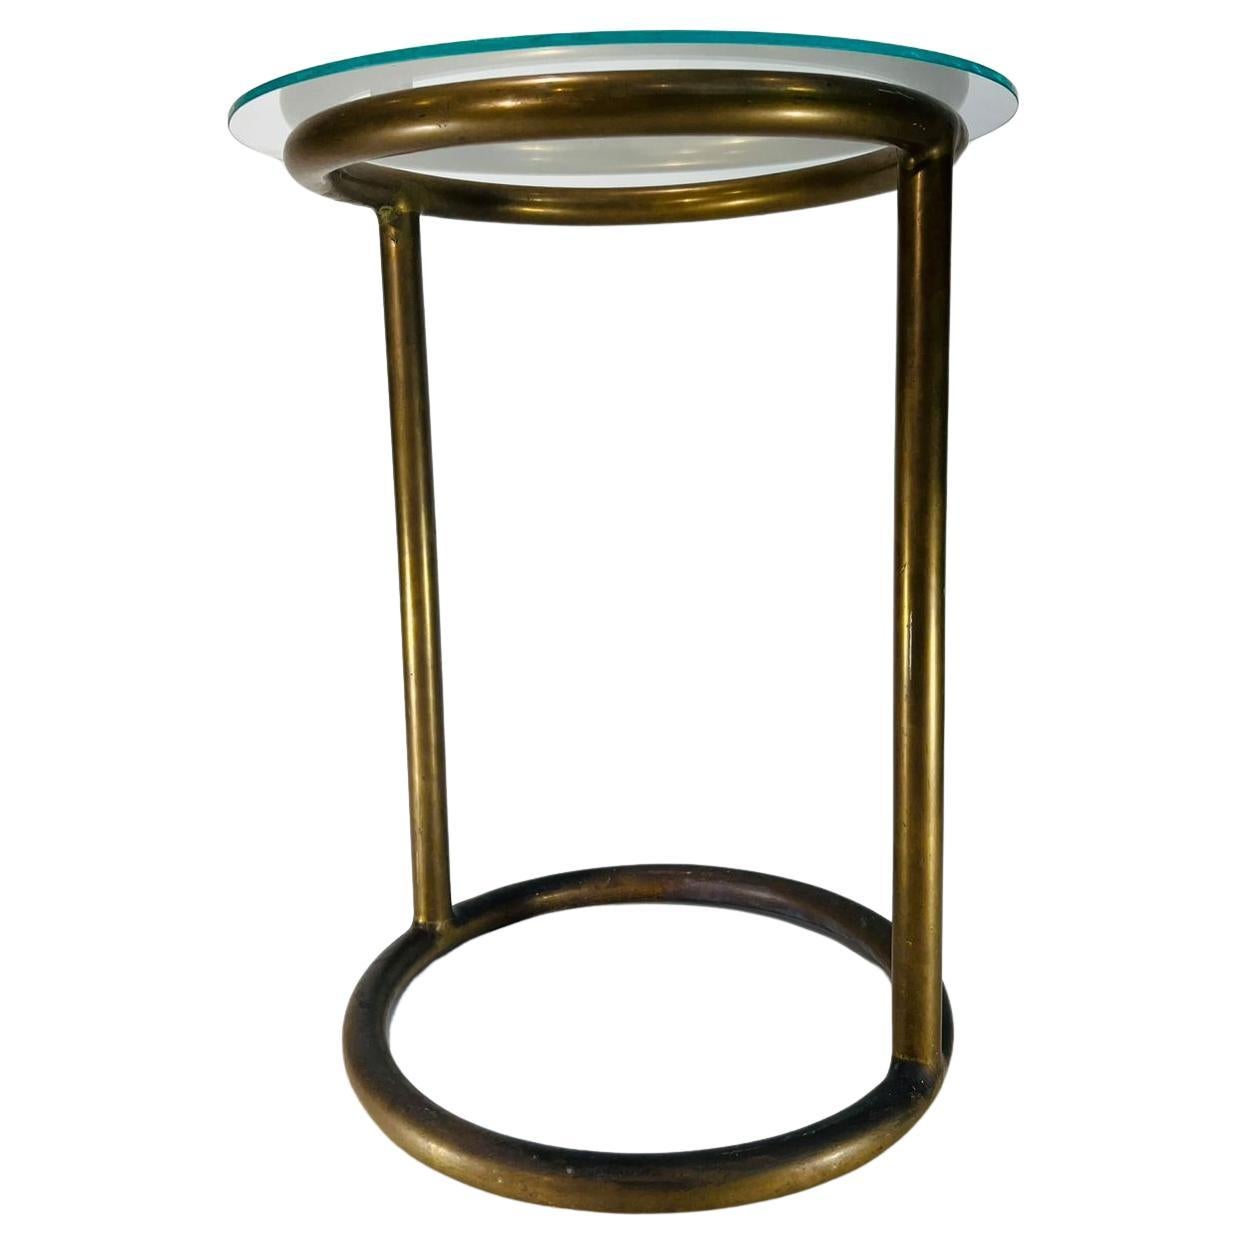 Eileen Gray side table in metal and glass circa 1930 Art Deco